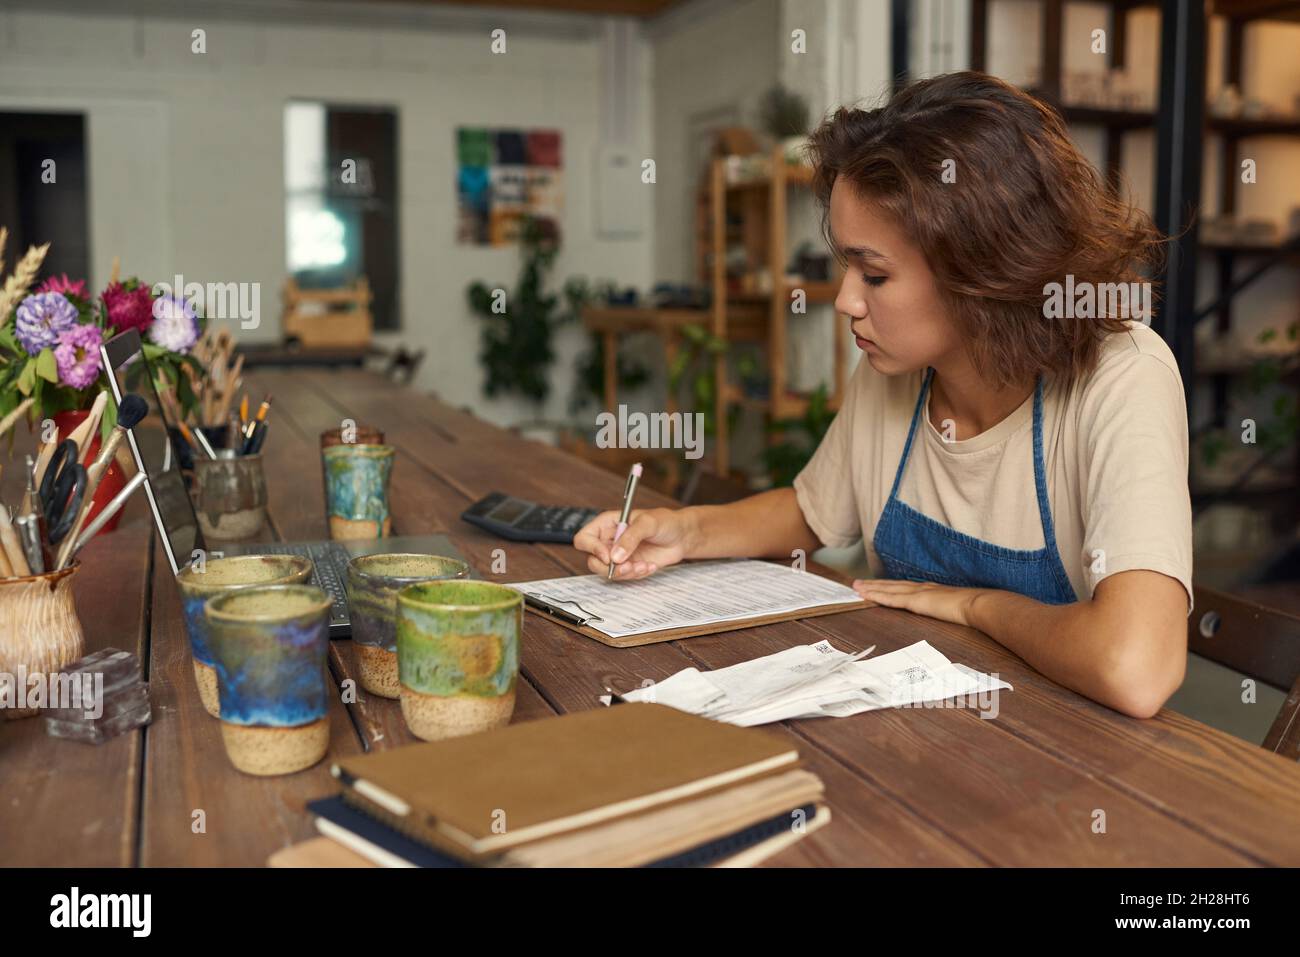 Concentrated young woman sitting at wooden table with ceramic mugs and ananlyzing receipts while working in pottery workshop Stock Photo